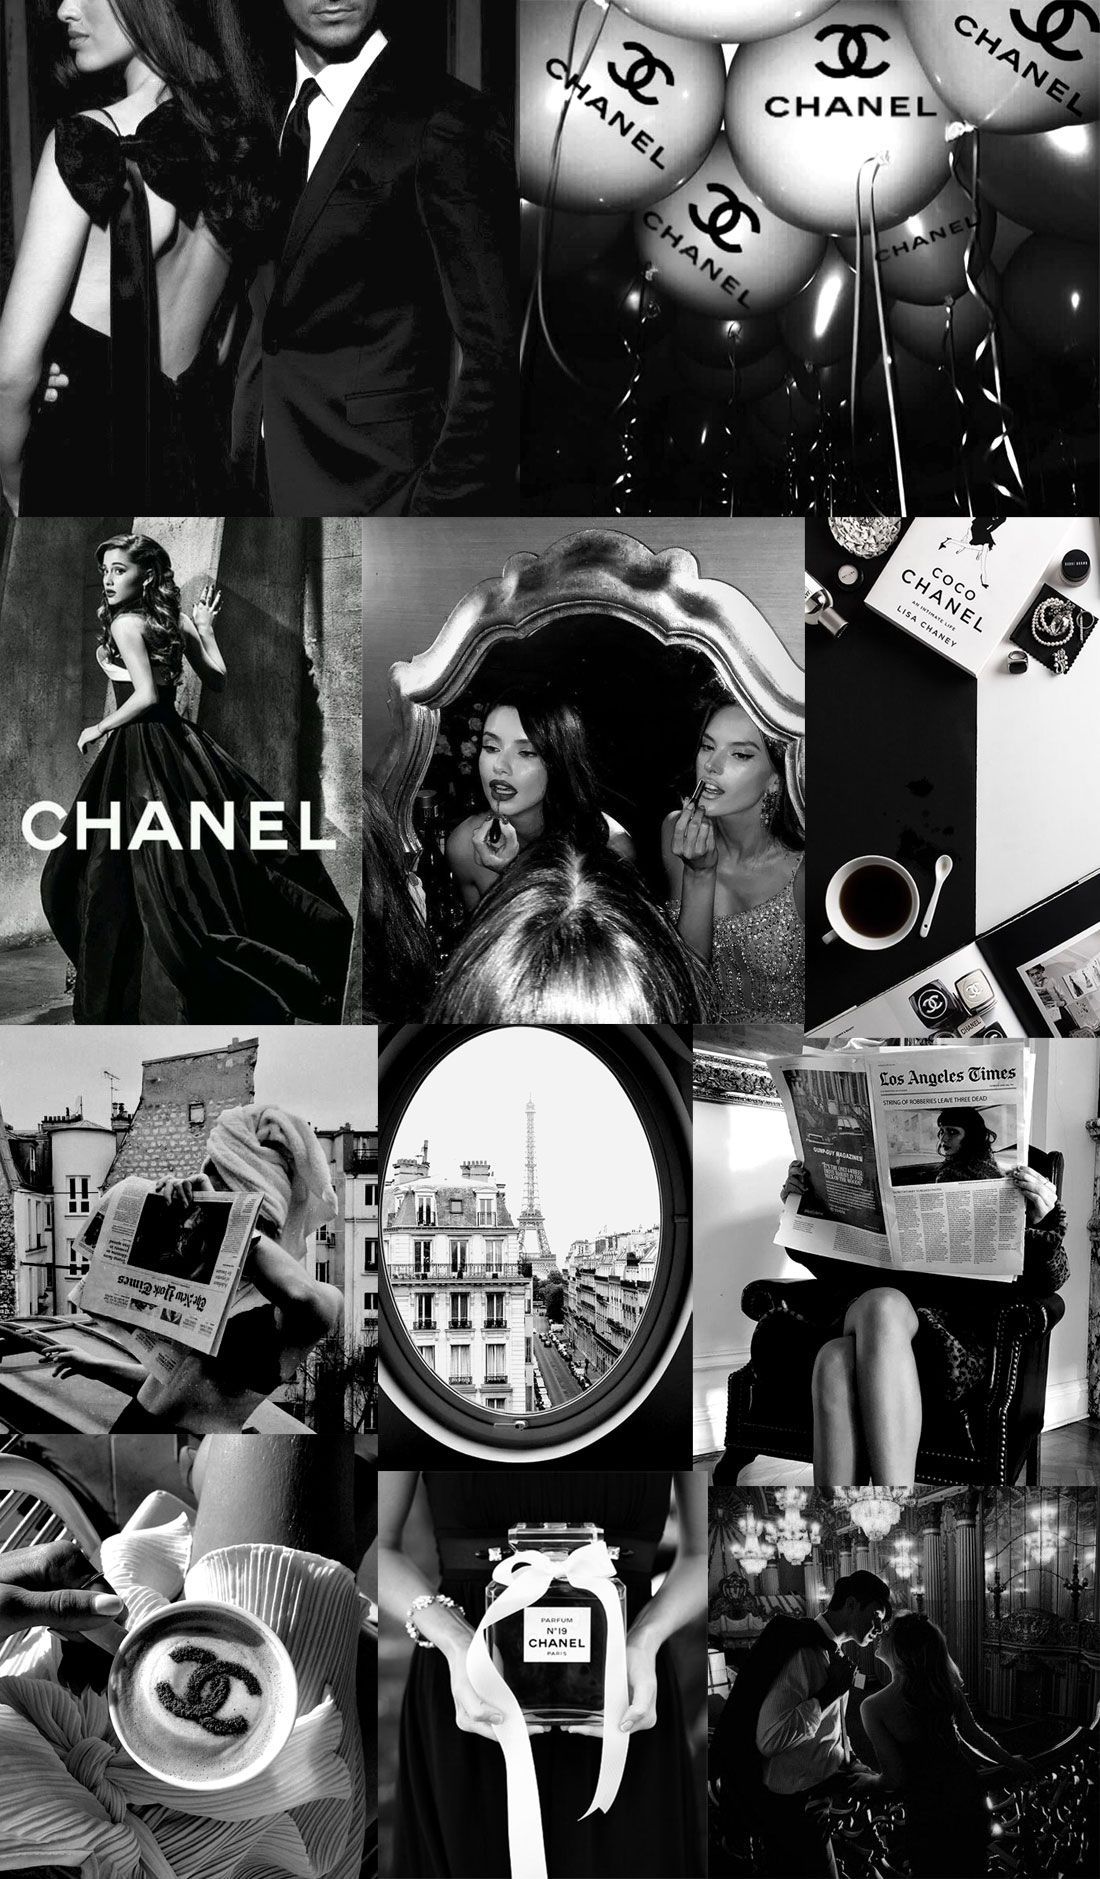 A collage of pictures with chanel products - Los Angeles, Chanel, black and white, gray, makeup